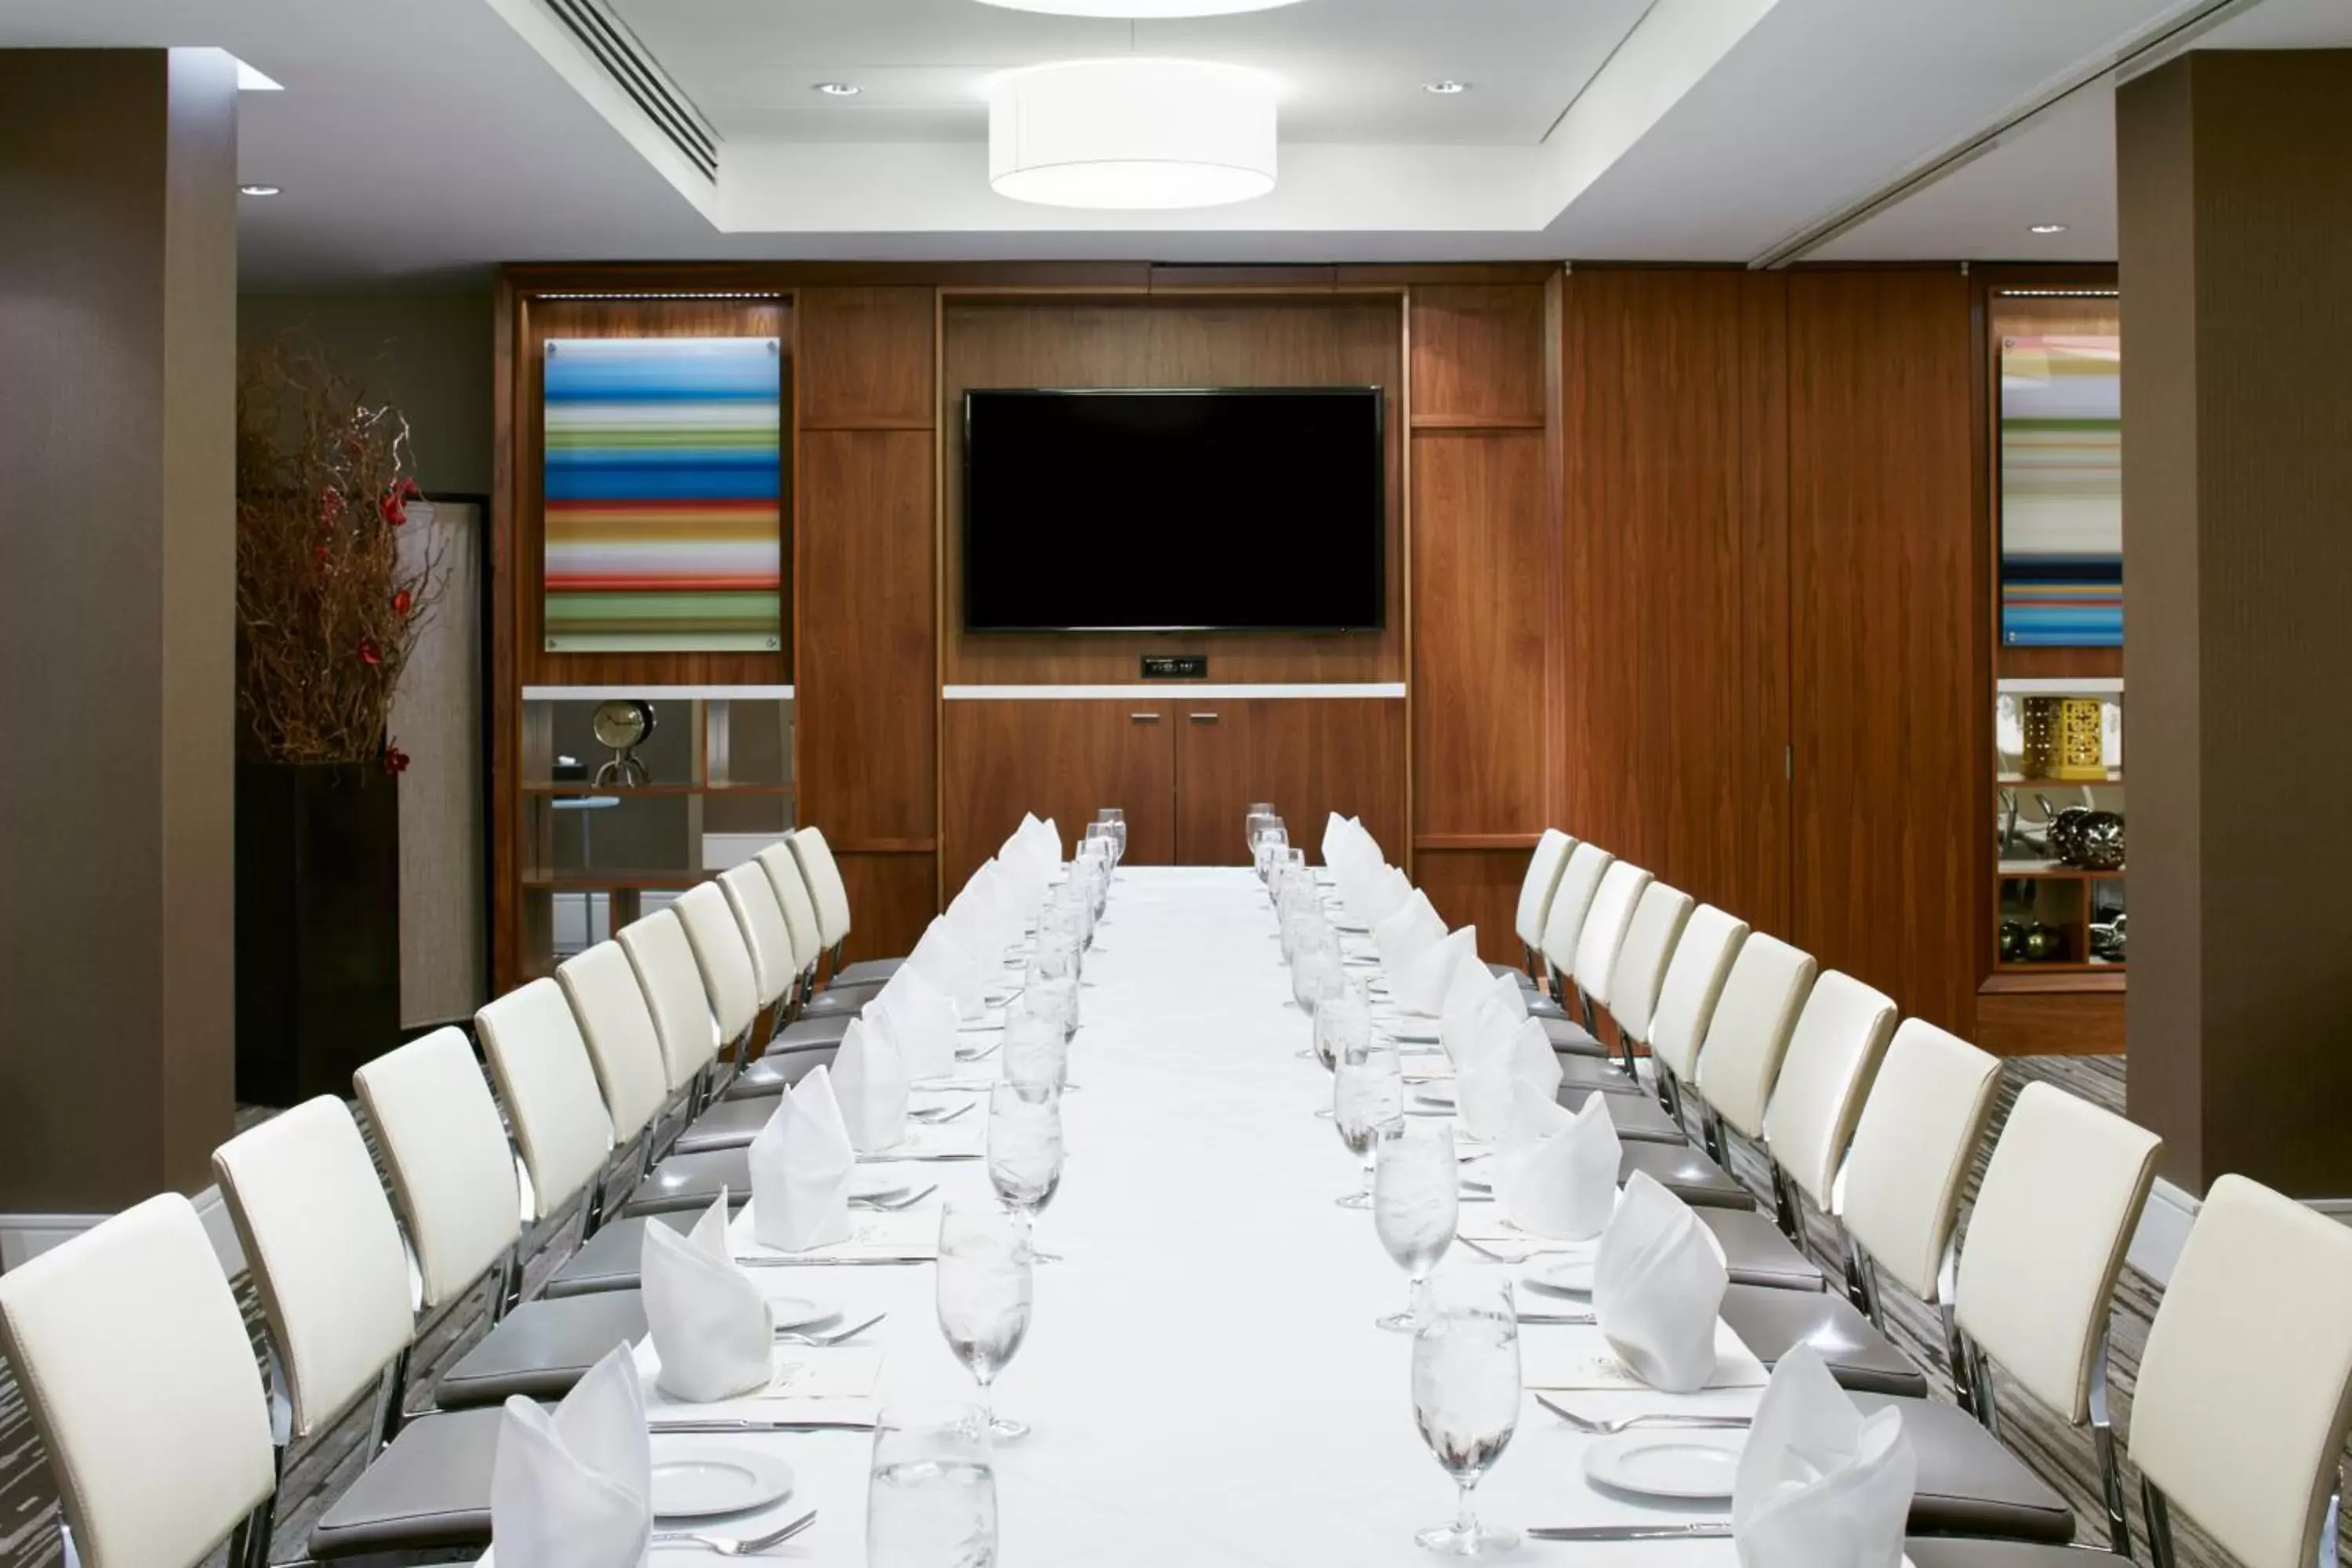 Meeting/conference room, Banquet Facilities in Club Quarters Hotel Grand Central, New York